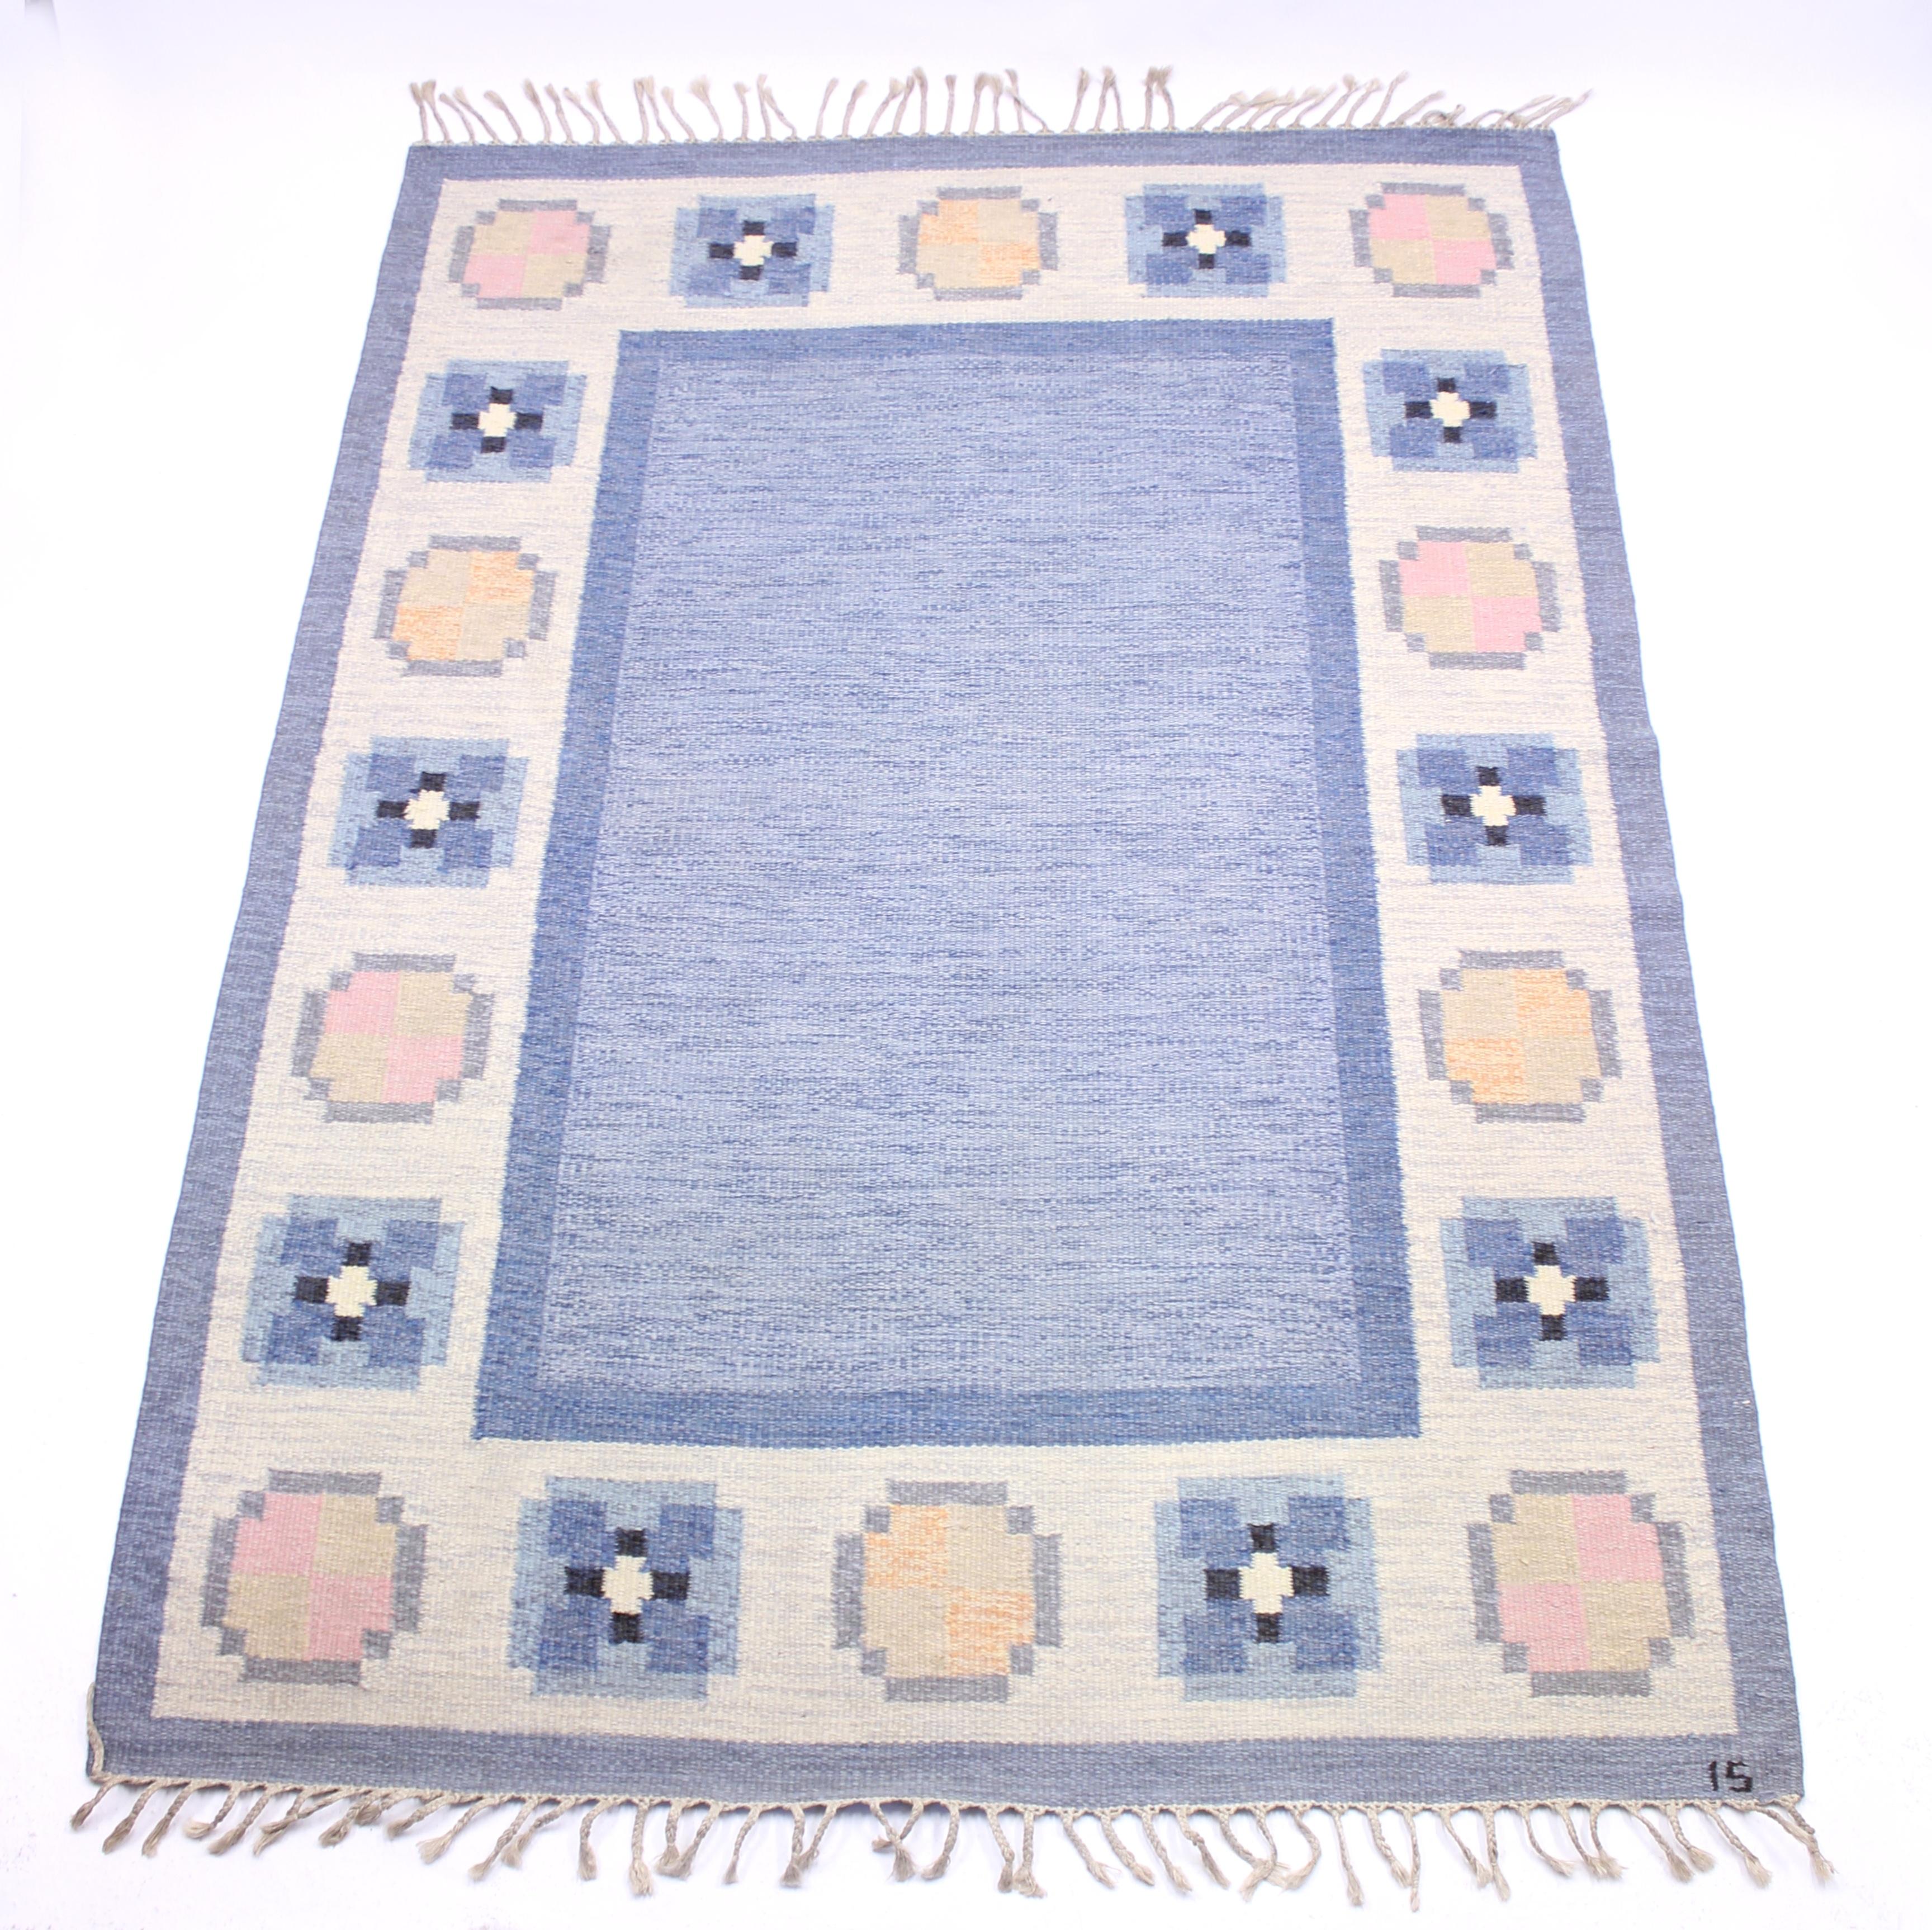 Flat weave Röllakan carpet designed by Ingered Silow in the 1950s. Main colours are blue and white with a dose of pink, black and yellow. Newly cleaned by a professional carpet cleaning company. Very good vintage condition with minimal ware